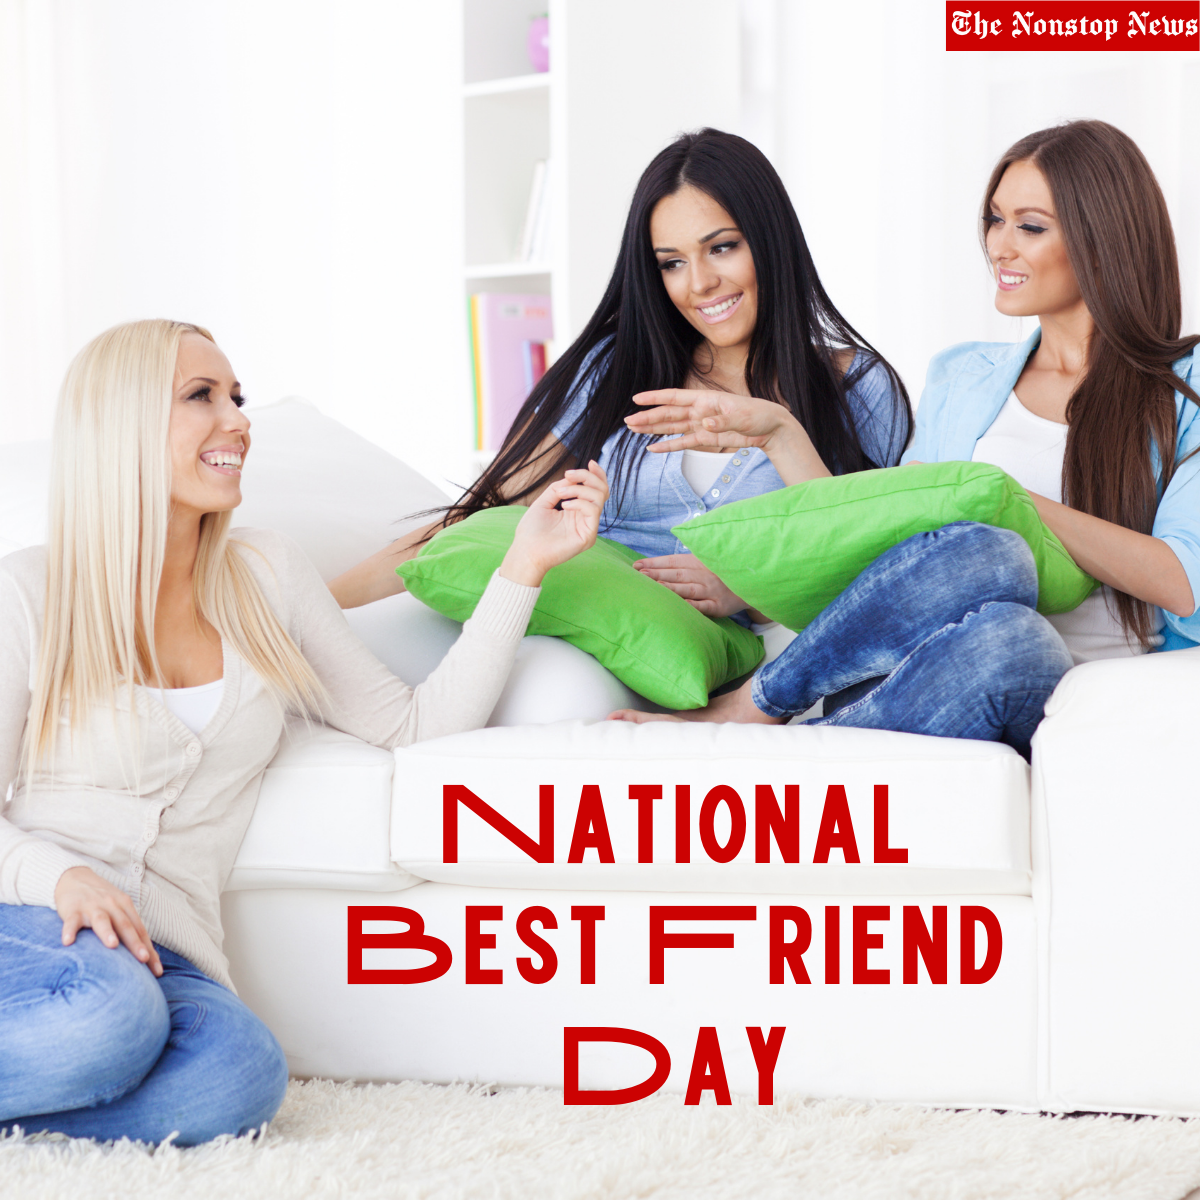 National Best Friend Day in the United States 2022: Top Quotes, Posters, Wishes, Greetings, Memes, Instagram Captions to Share